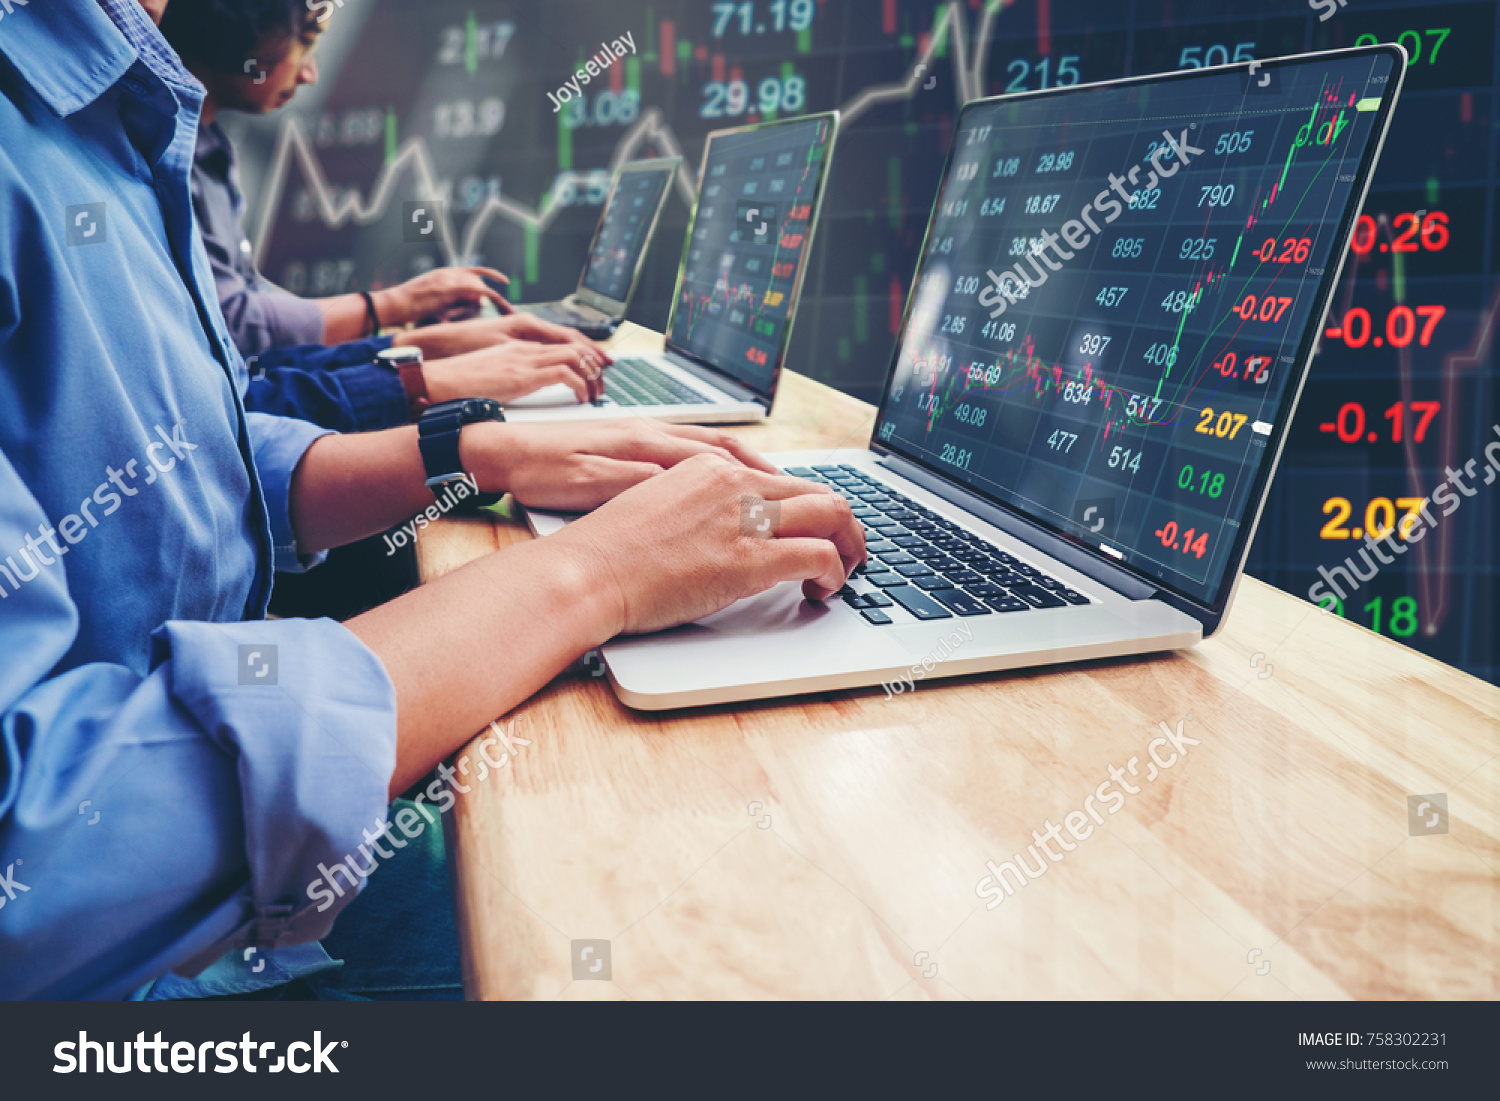 Business Team Investment Entrepreneur Trading working on Laptop Stock market exchange information and Trading graph #758302231